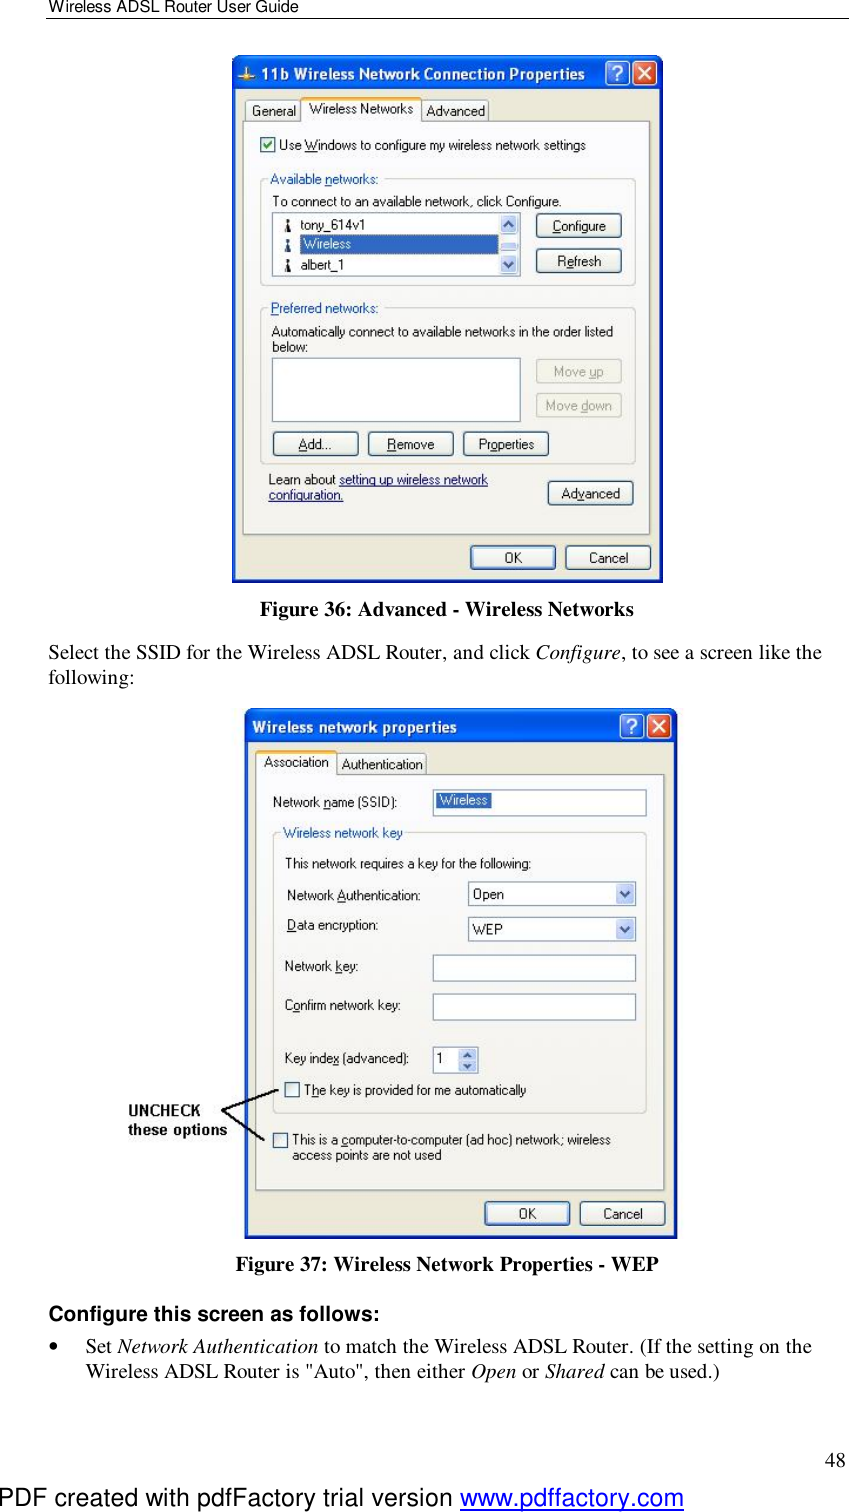 Wireless ADSL Router User Guide 48  Figure 36: Advanced - Wireless Networks Select the SSID for the Wireless ADSL Router, and click Configure, to see a screen like the following:  Figure 37: Wireless Network Properties - WEP Configure this screen as follows: •  Set Network Authentication to match the Wireless ADSL Router. (If the setting on the Wireless ADSL Router is &quot;Auto&quot;, then either Open or Shared can be used.) PDF created with pdfFactory trial version www.pdffactory.com